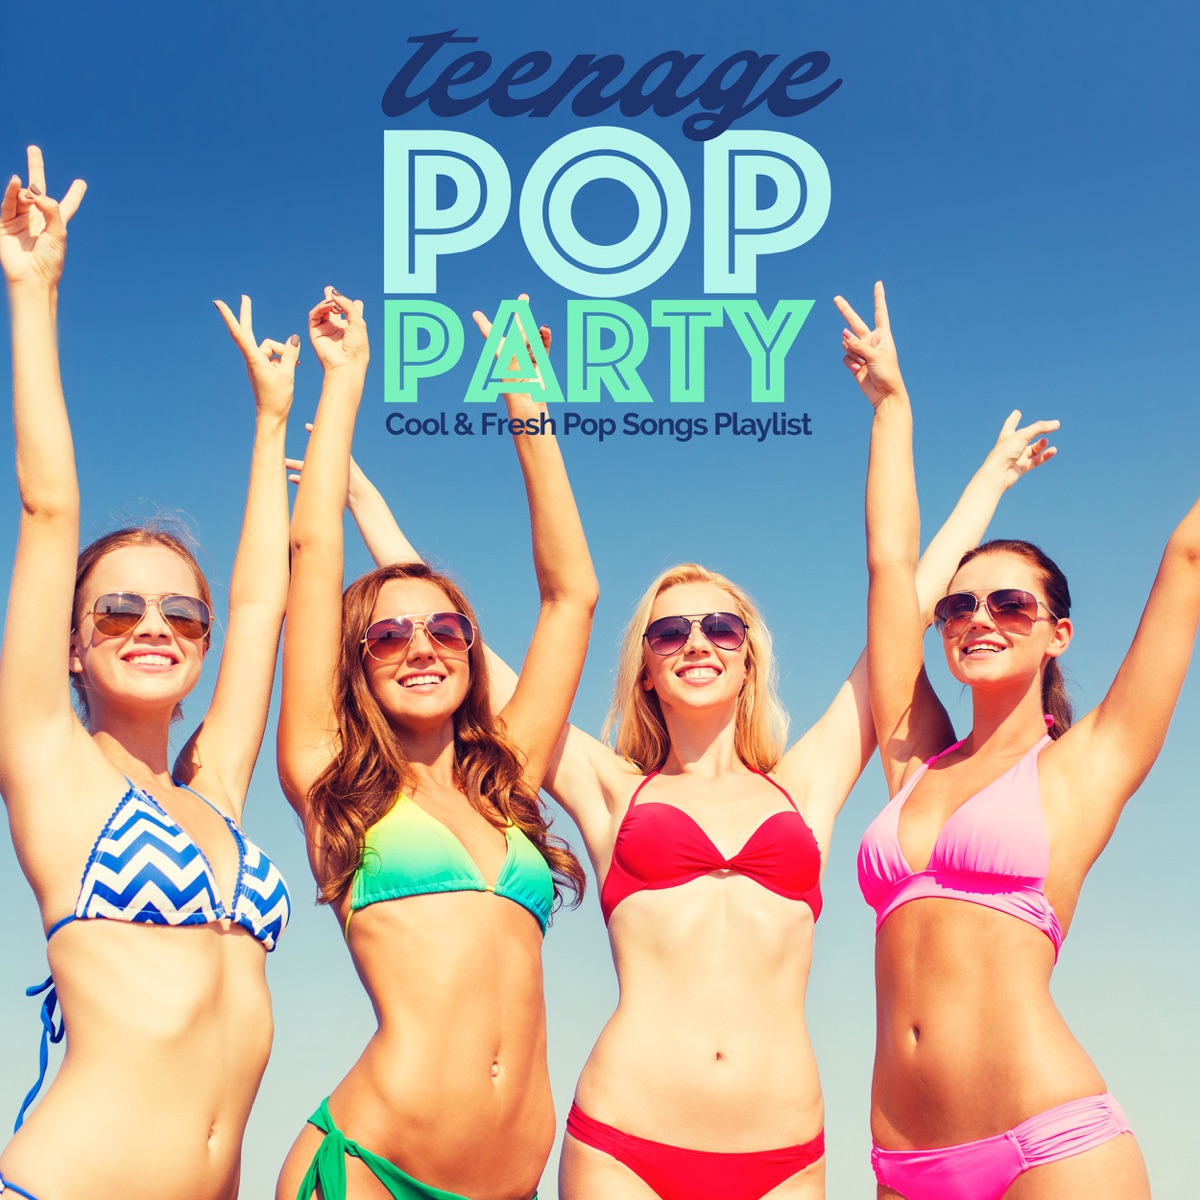 Teenage Pop Party (Cool & Fresh Pop Songs Playlist) - Album by Various  Artists - Apple Music